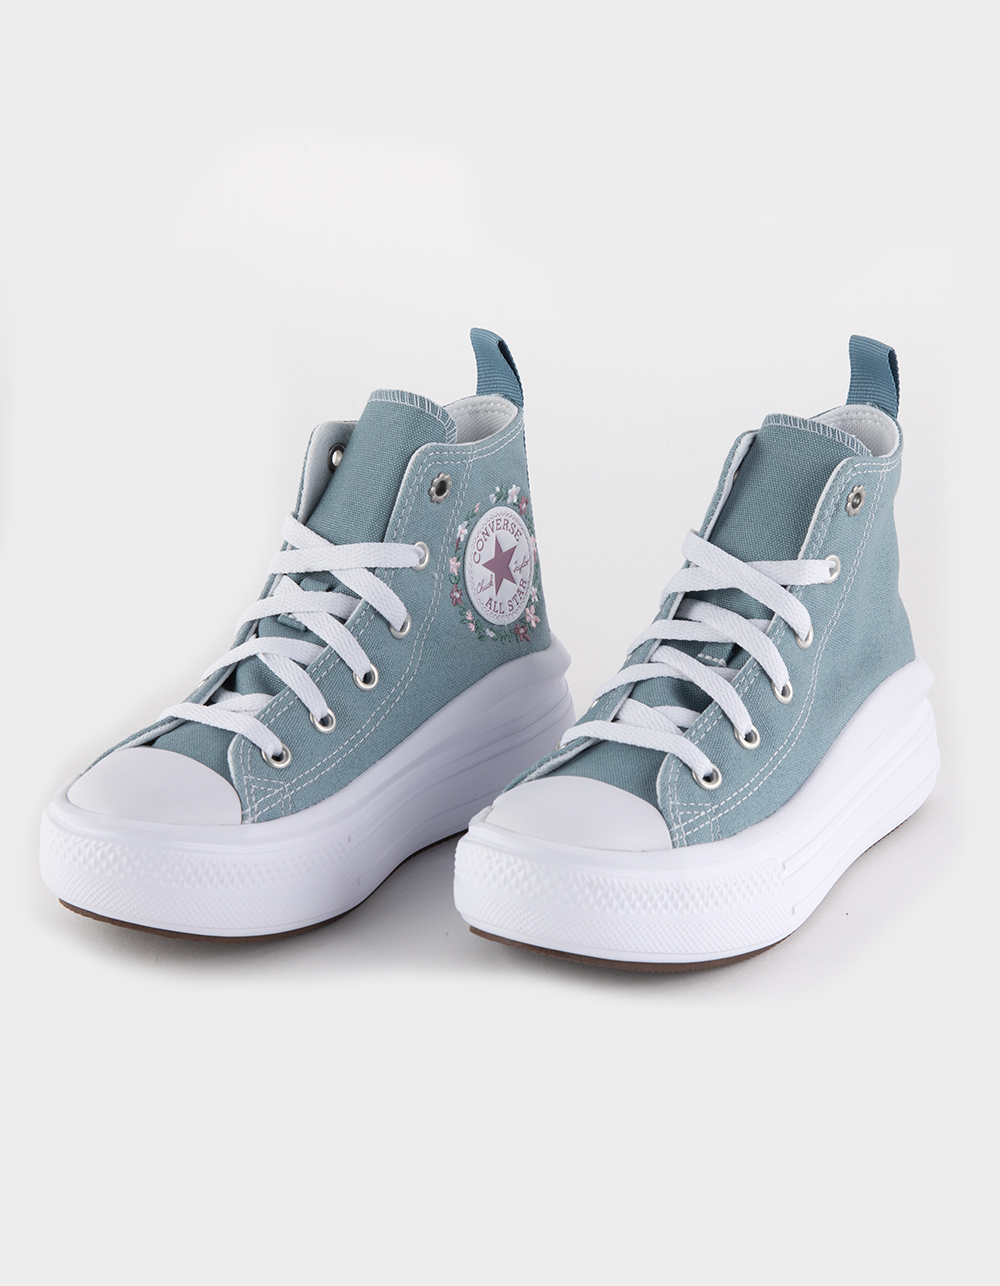 CONVERSE Chuck Taylor All Star Move Embroidered Florals Girls High Top Shoes